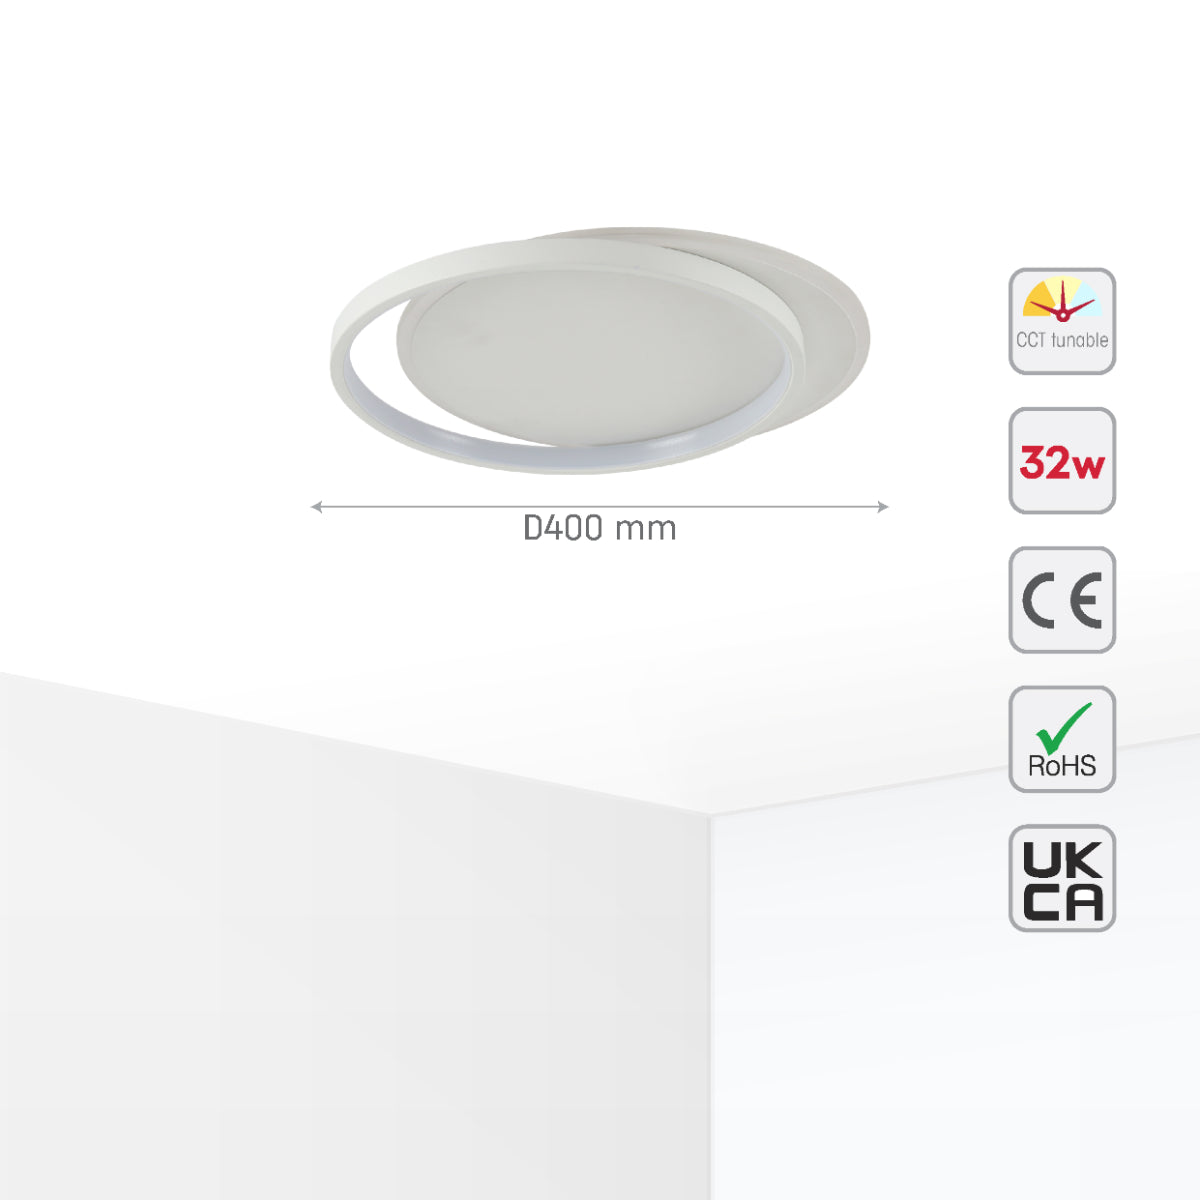 Size and certifications of Dual-Ring LED Flush Ceiling Light 159-18101